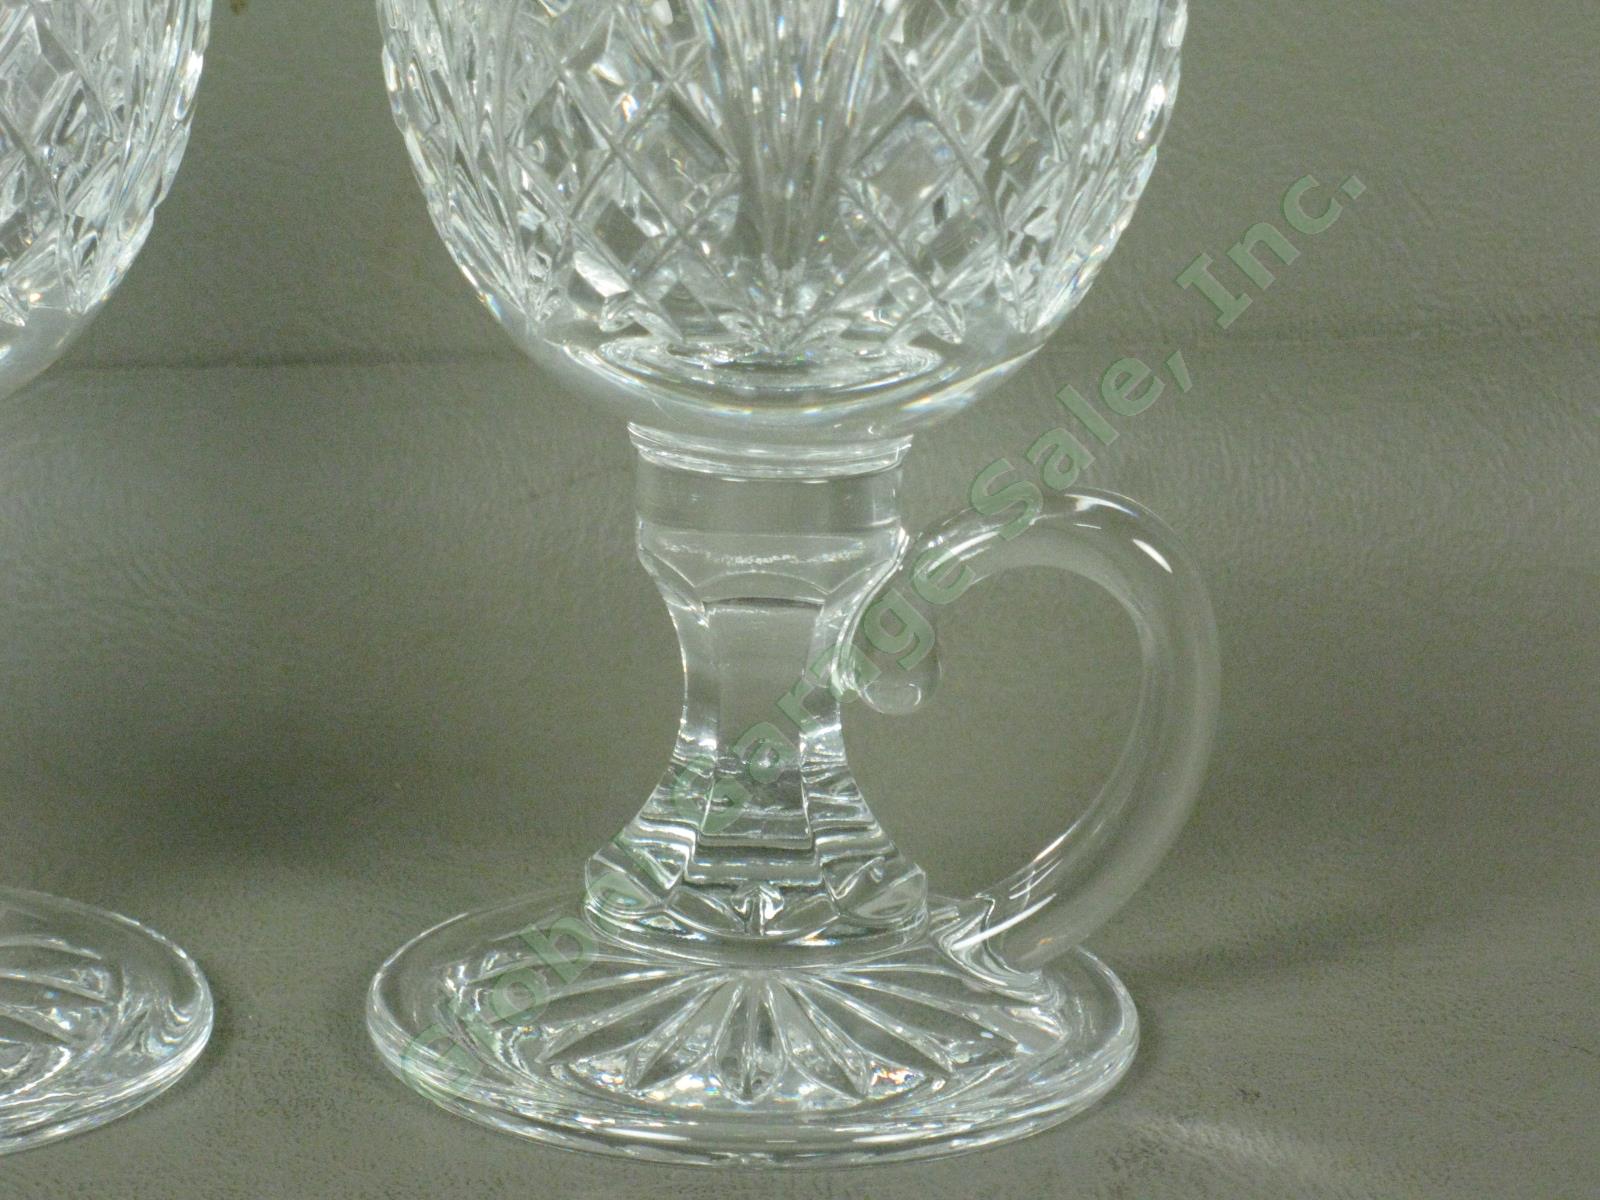 2 Waterford Crystal Waterville Irish Coffee Mugs Footed Goblets Pair Exc Cond! 2